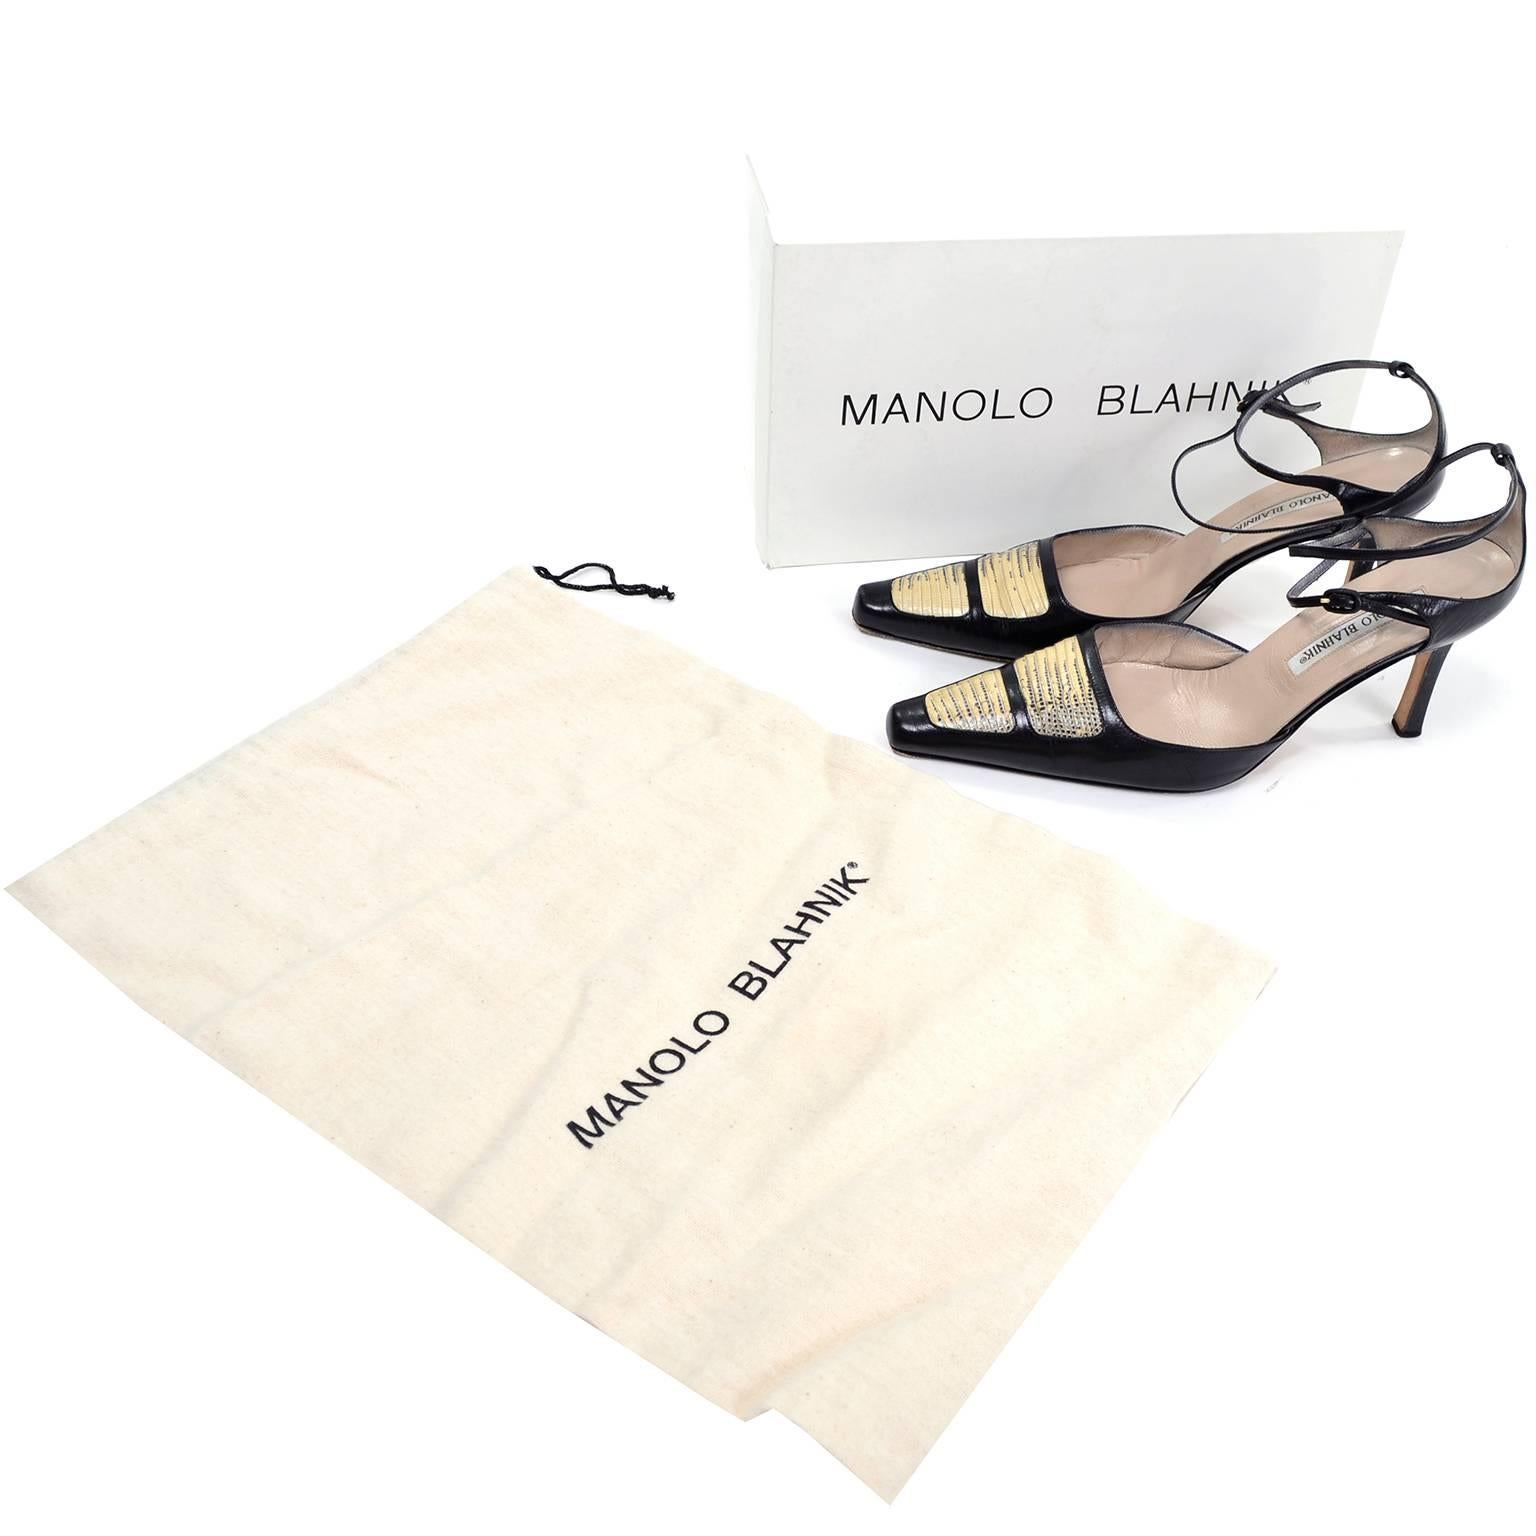 These are fabulous vintage Manolo Blahnik ankle strap pumps with black kid leather and lizard toes.  The shoes come with their original box and shoe bags. 
 The box reads: M-Lascivia Black Kid BZ-90 Lizard Roccia 90/LOM. These beautiful shoes are a